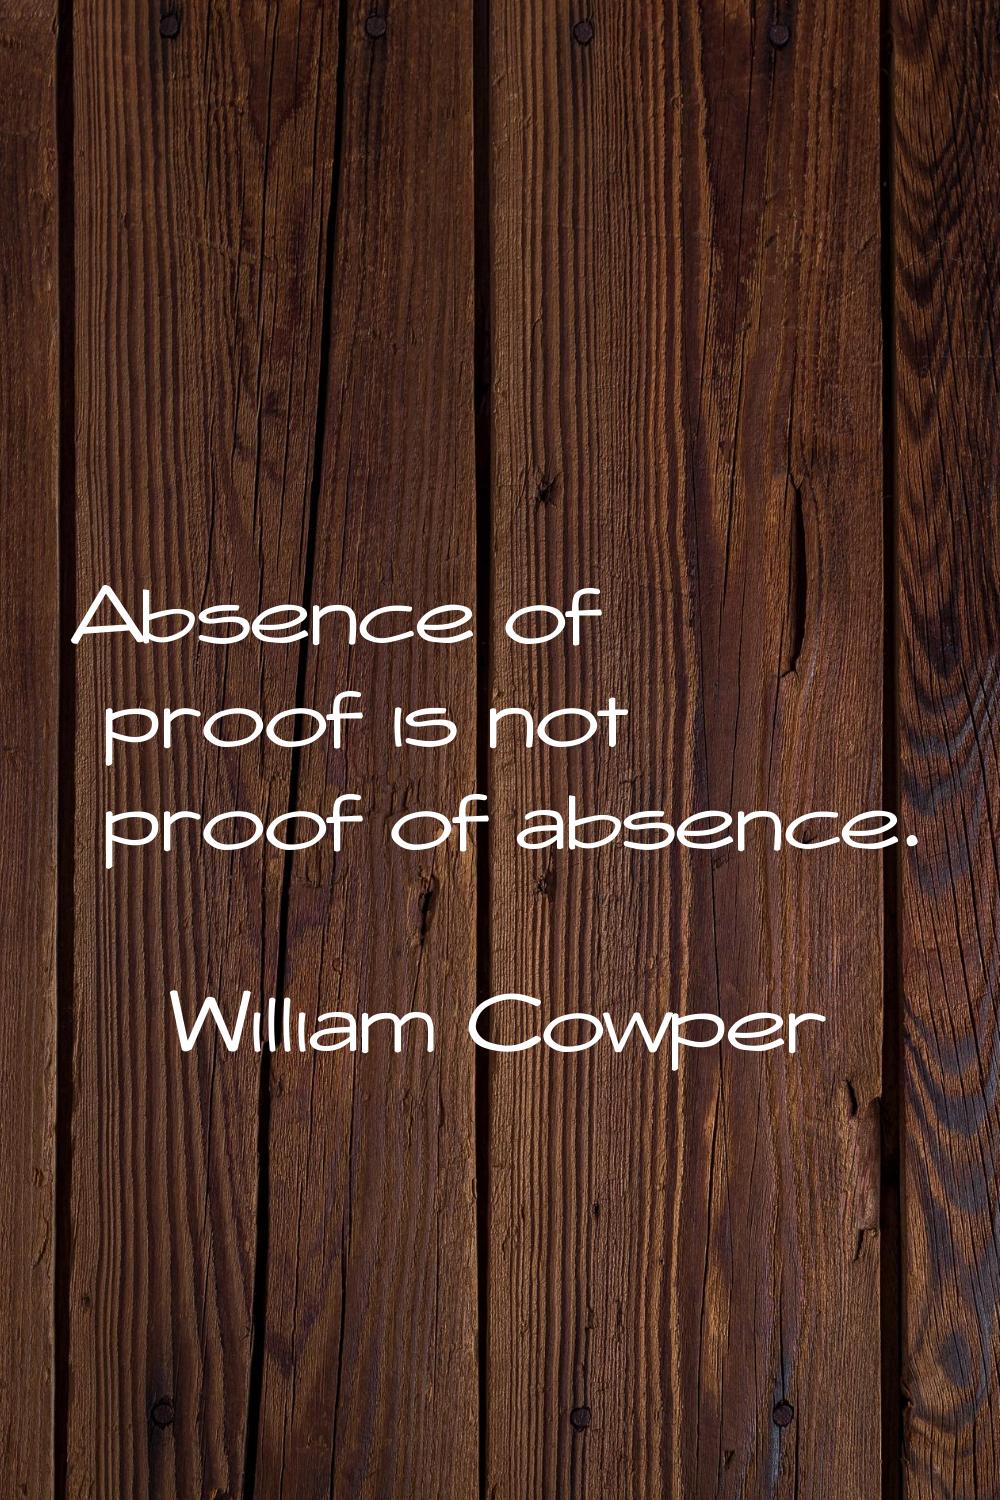 Absence of proof is not proof of absence.